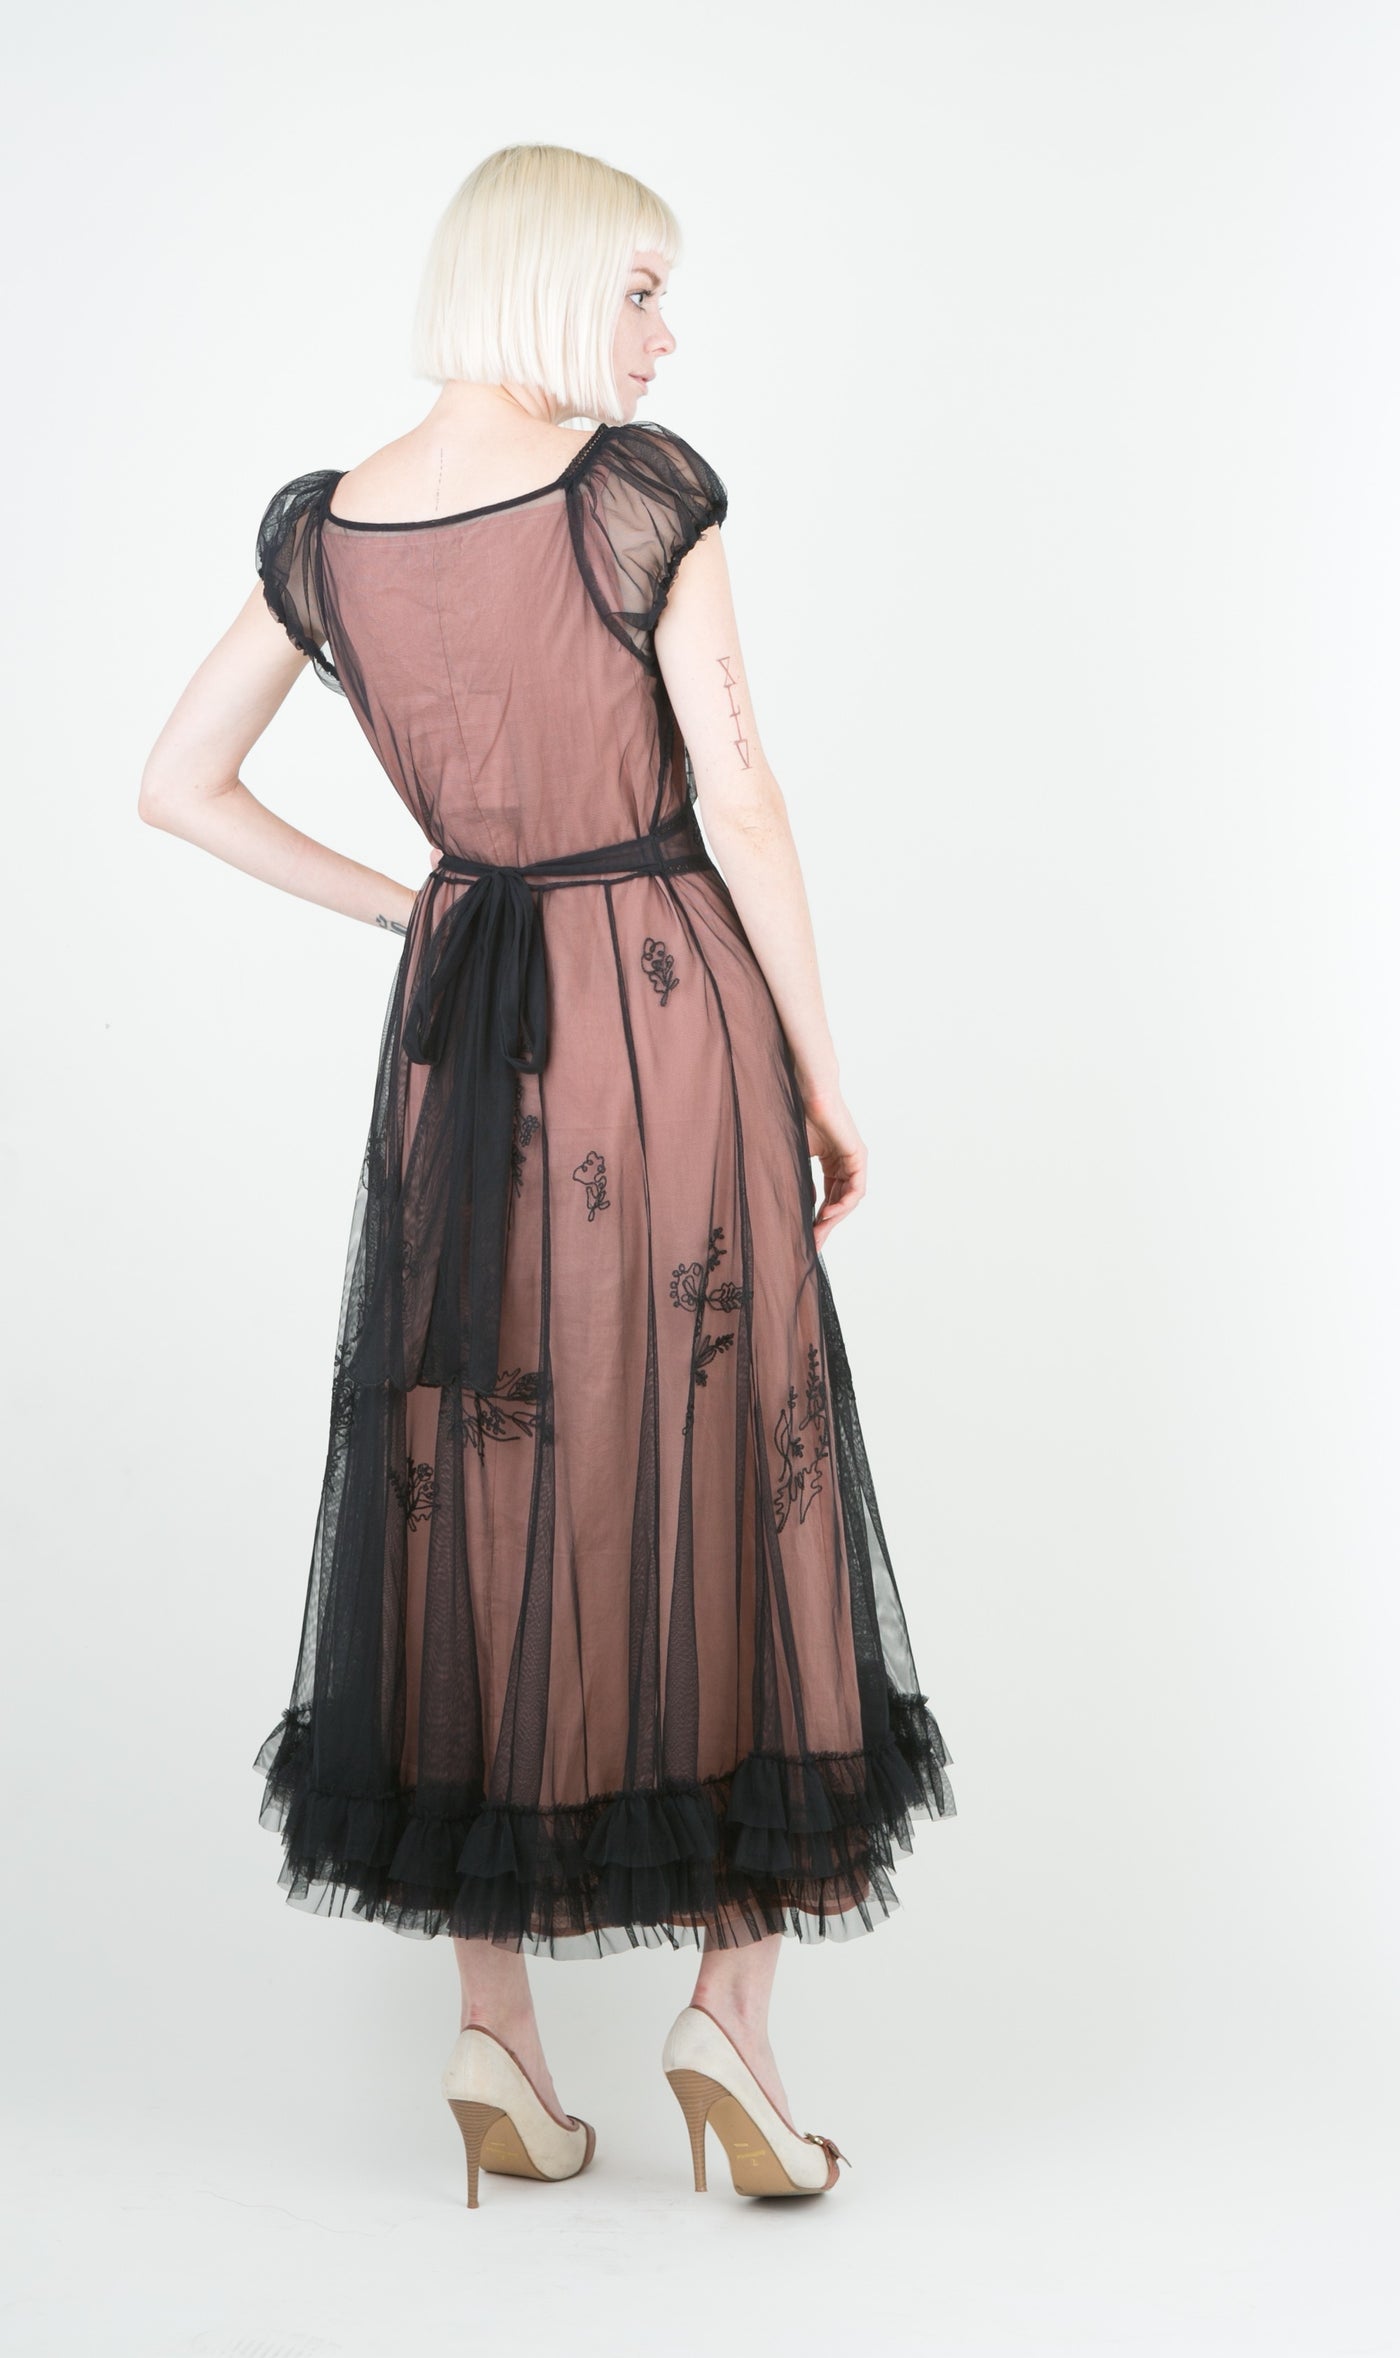 Ballerina Tea Party Dress in Black-Rose by Nataya - SOLD OUT